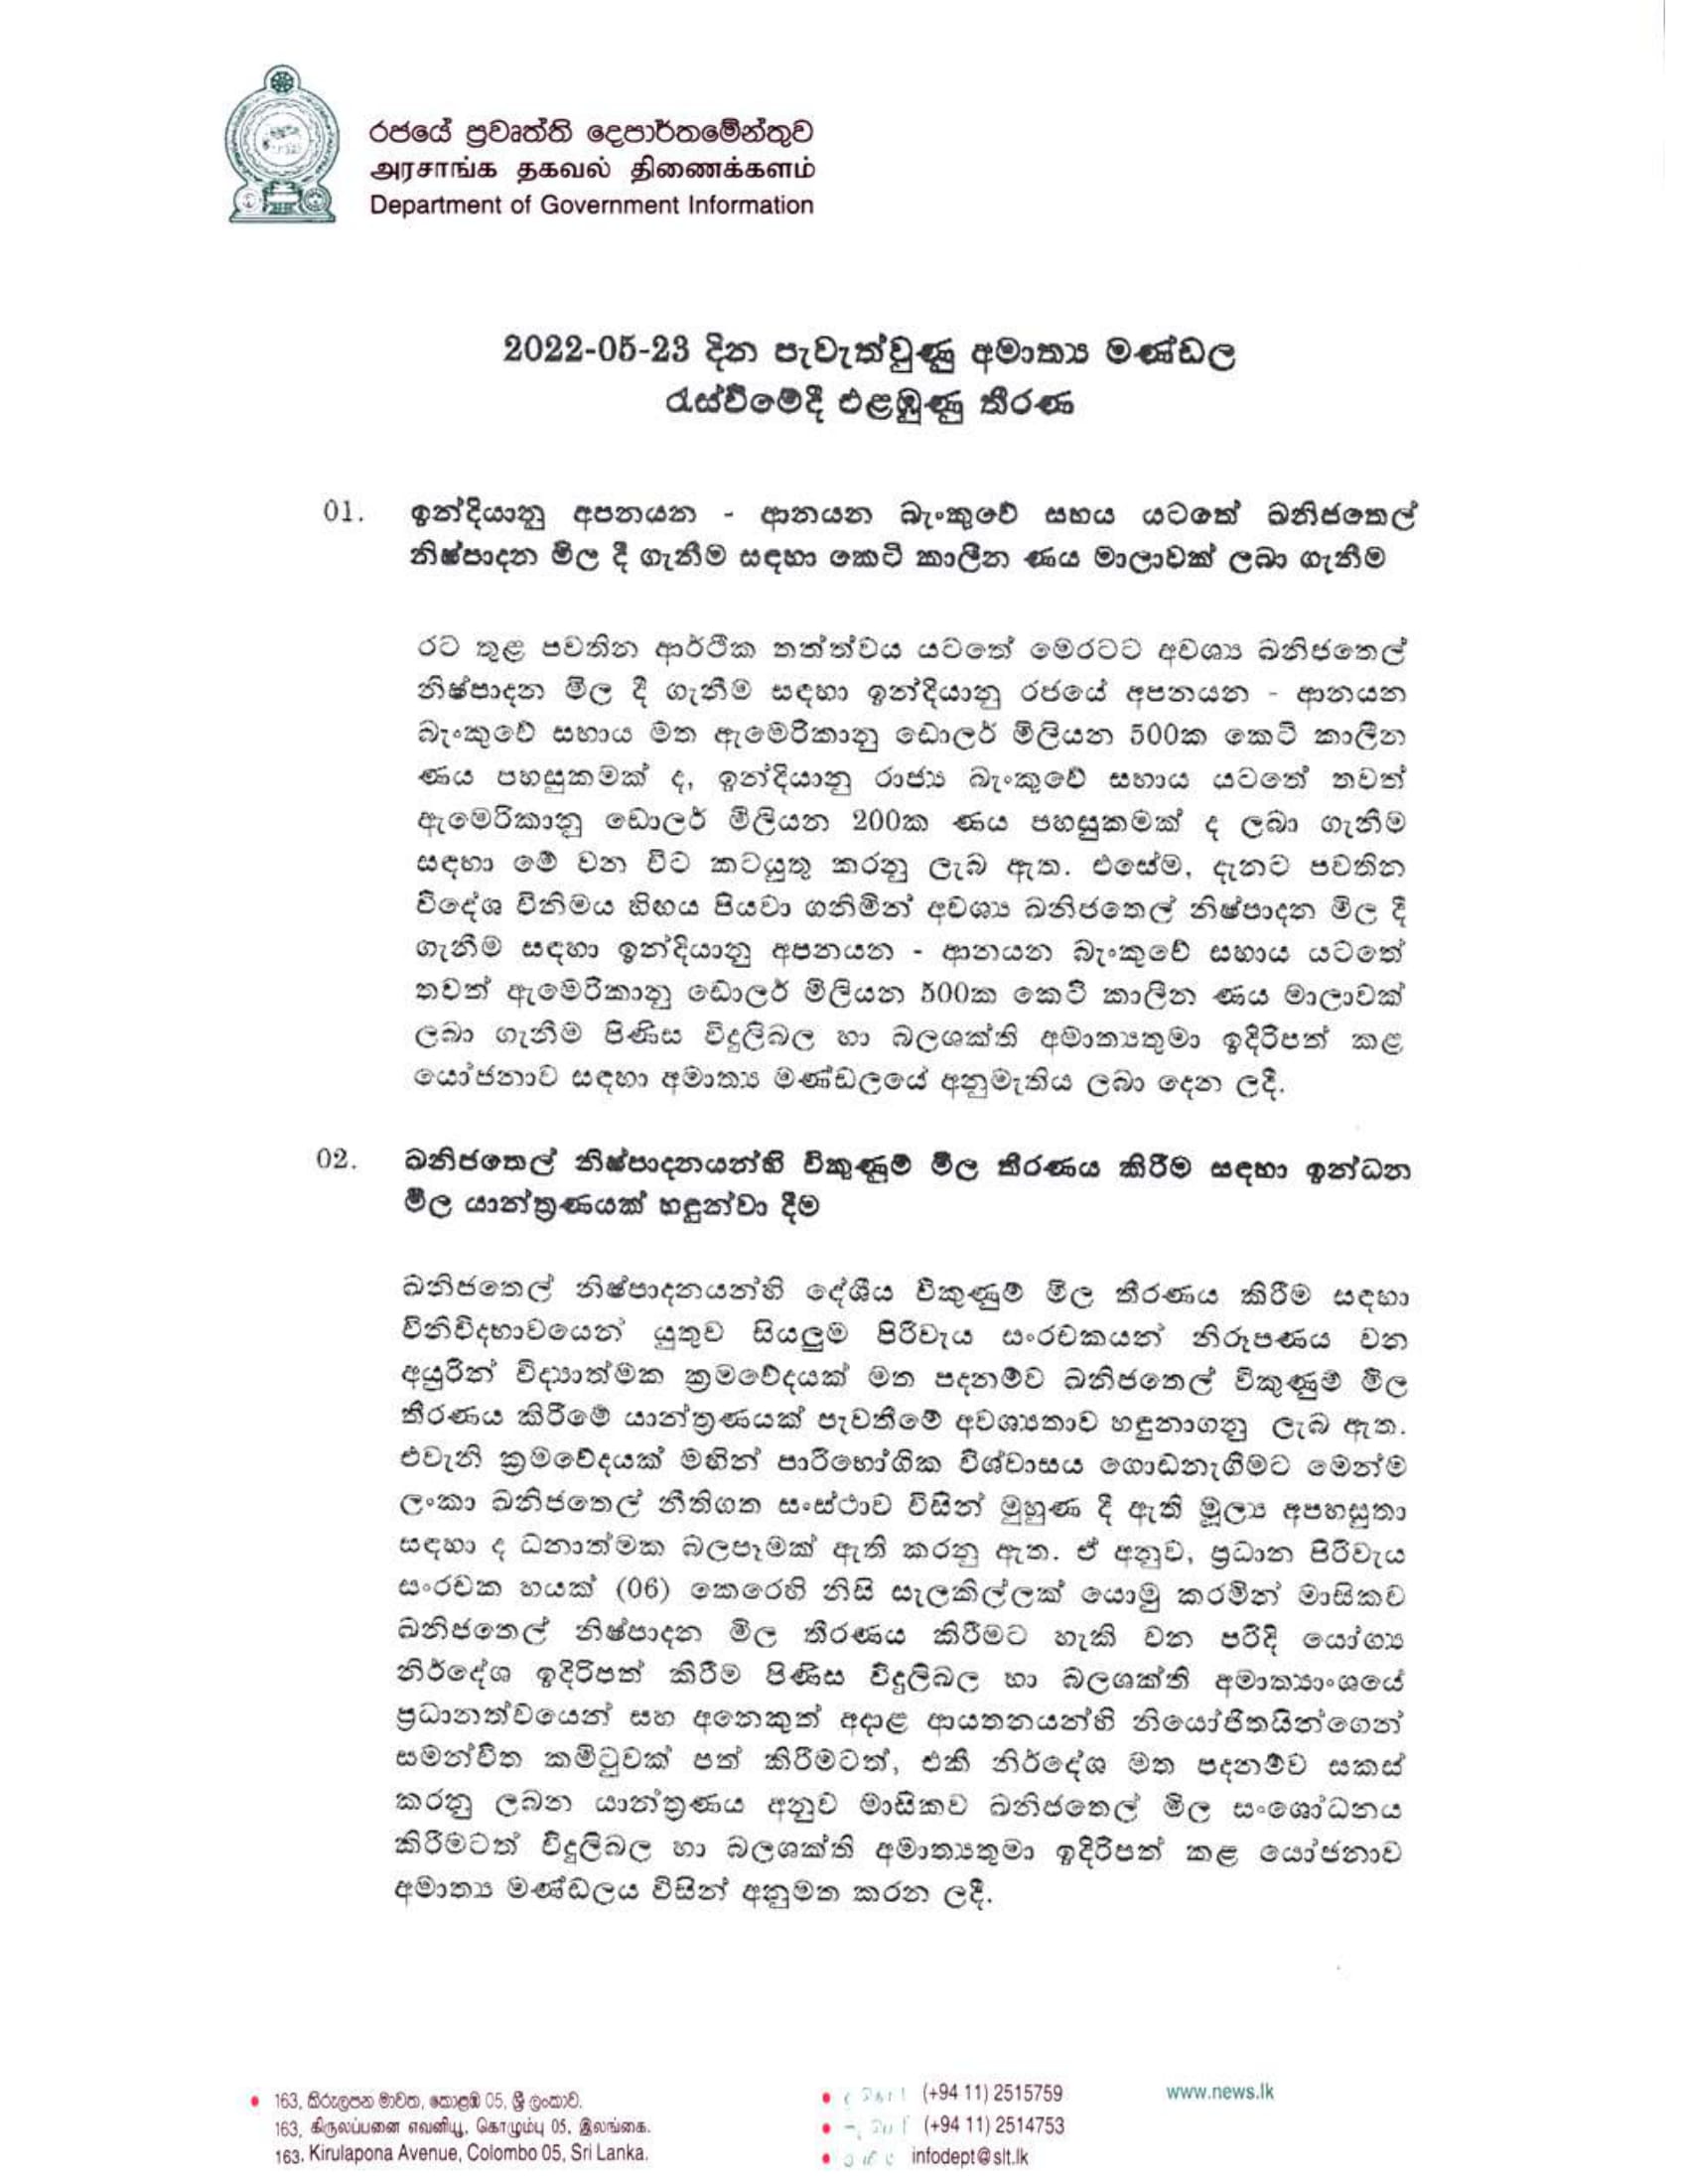 Cabinet Decision on 23.05.2022 1